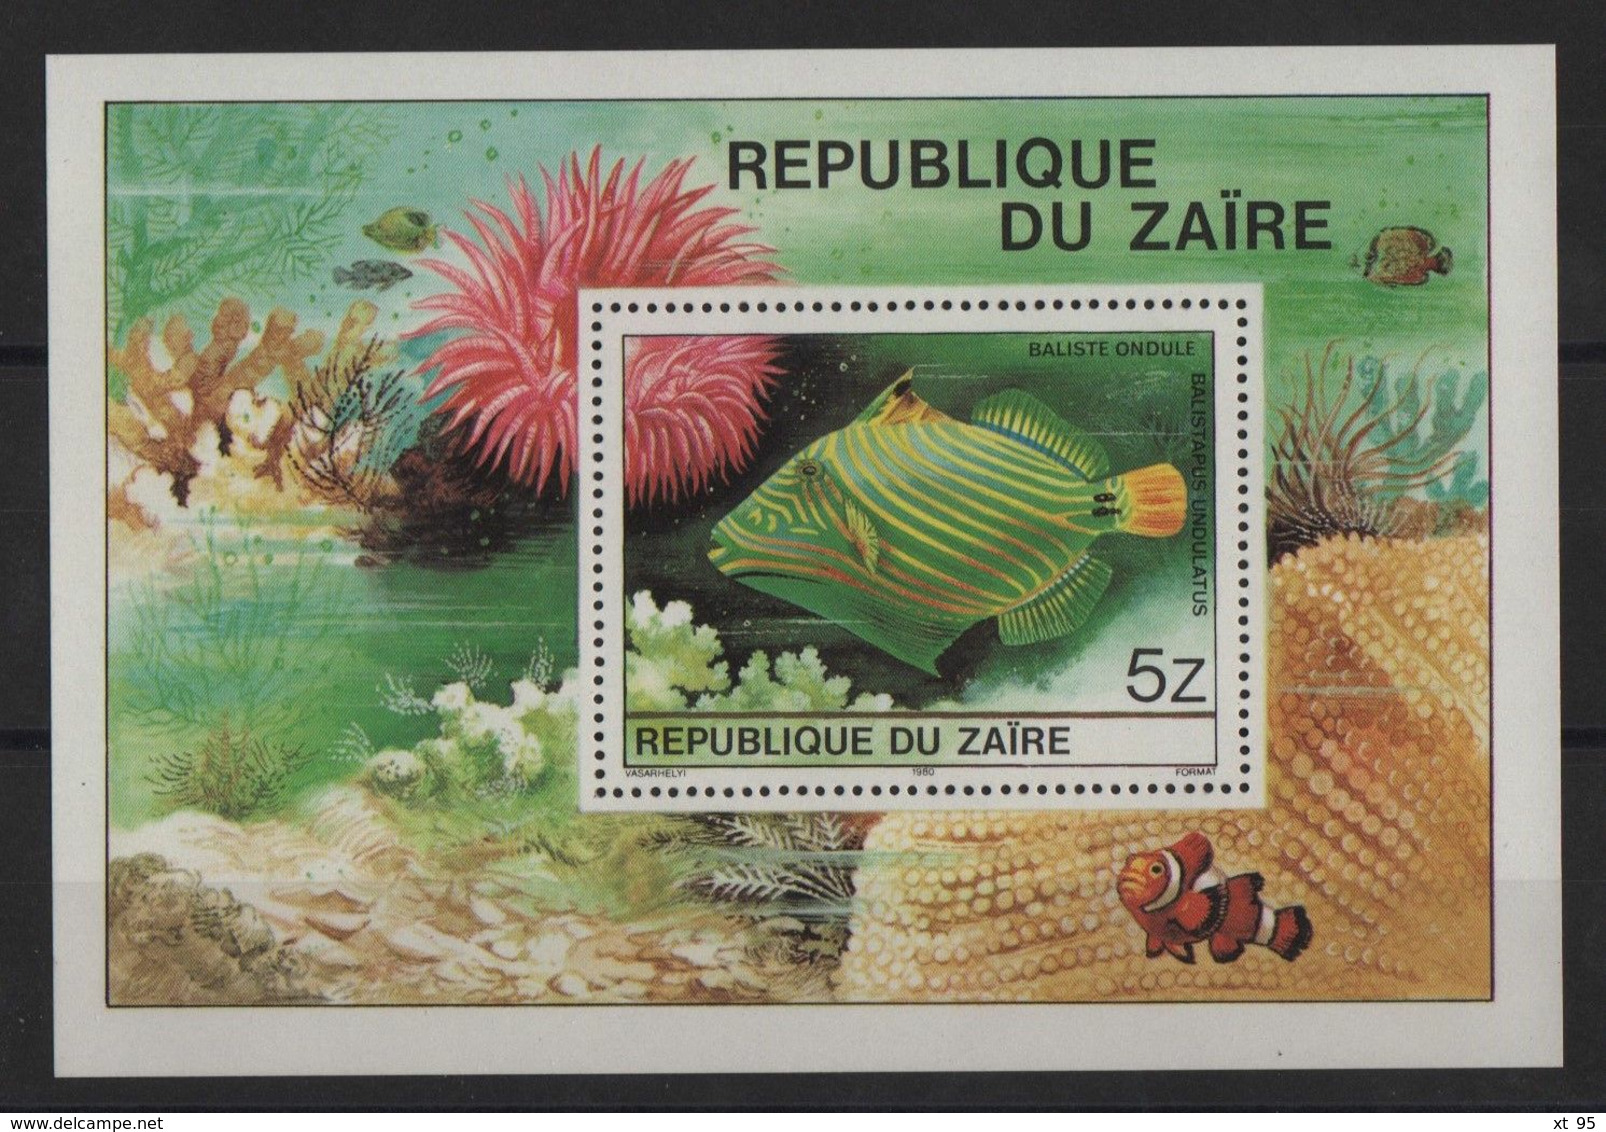 Zaire - BF N°23 - Faune - Poisson - Cote 5€ - ** Neufs Sans Charniere - Unused Stamps